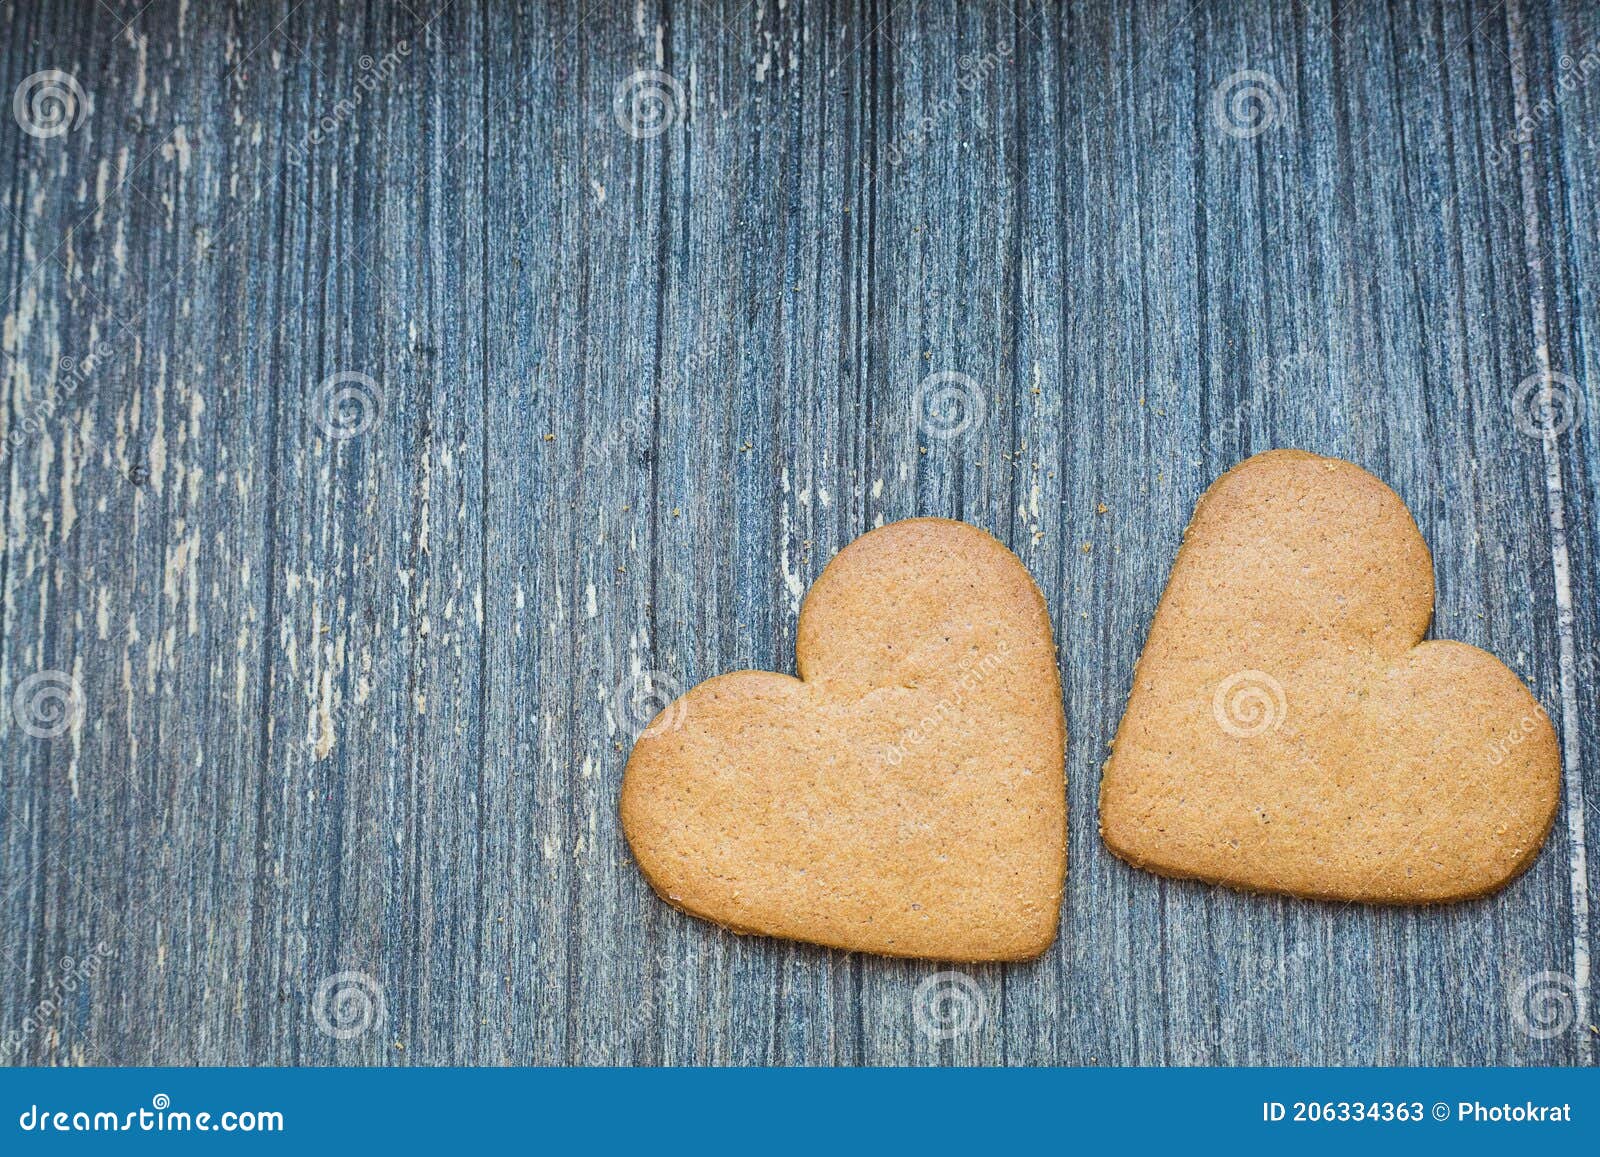 grey wooden aged background with ginger bread biscuits. saint valentines frame with copy space. love and wedding